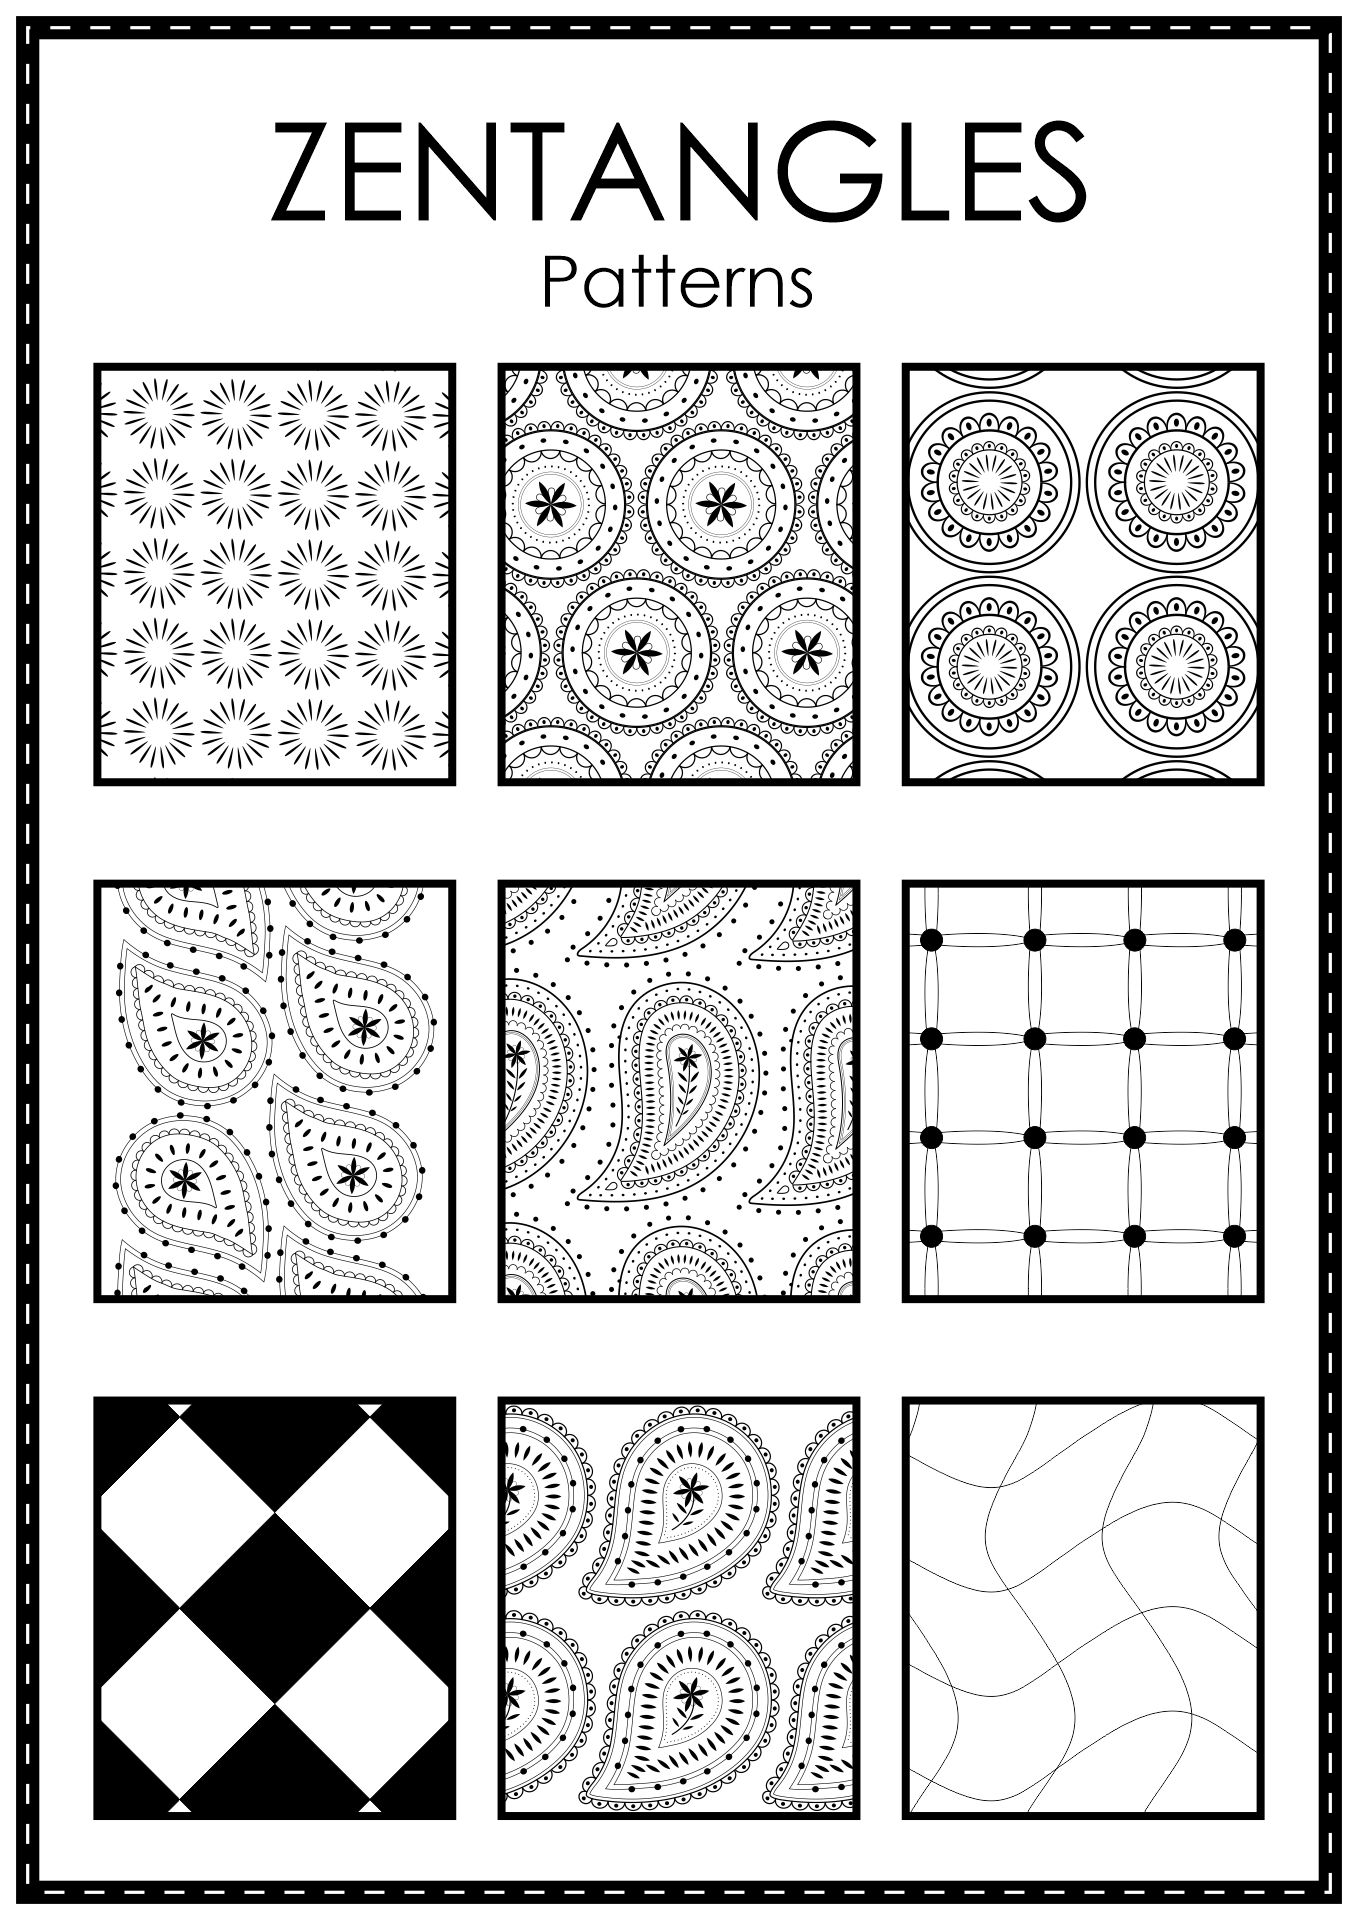 Texture and Pattern for Zentangles